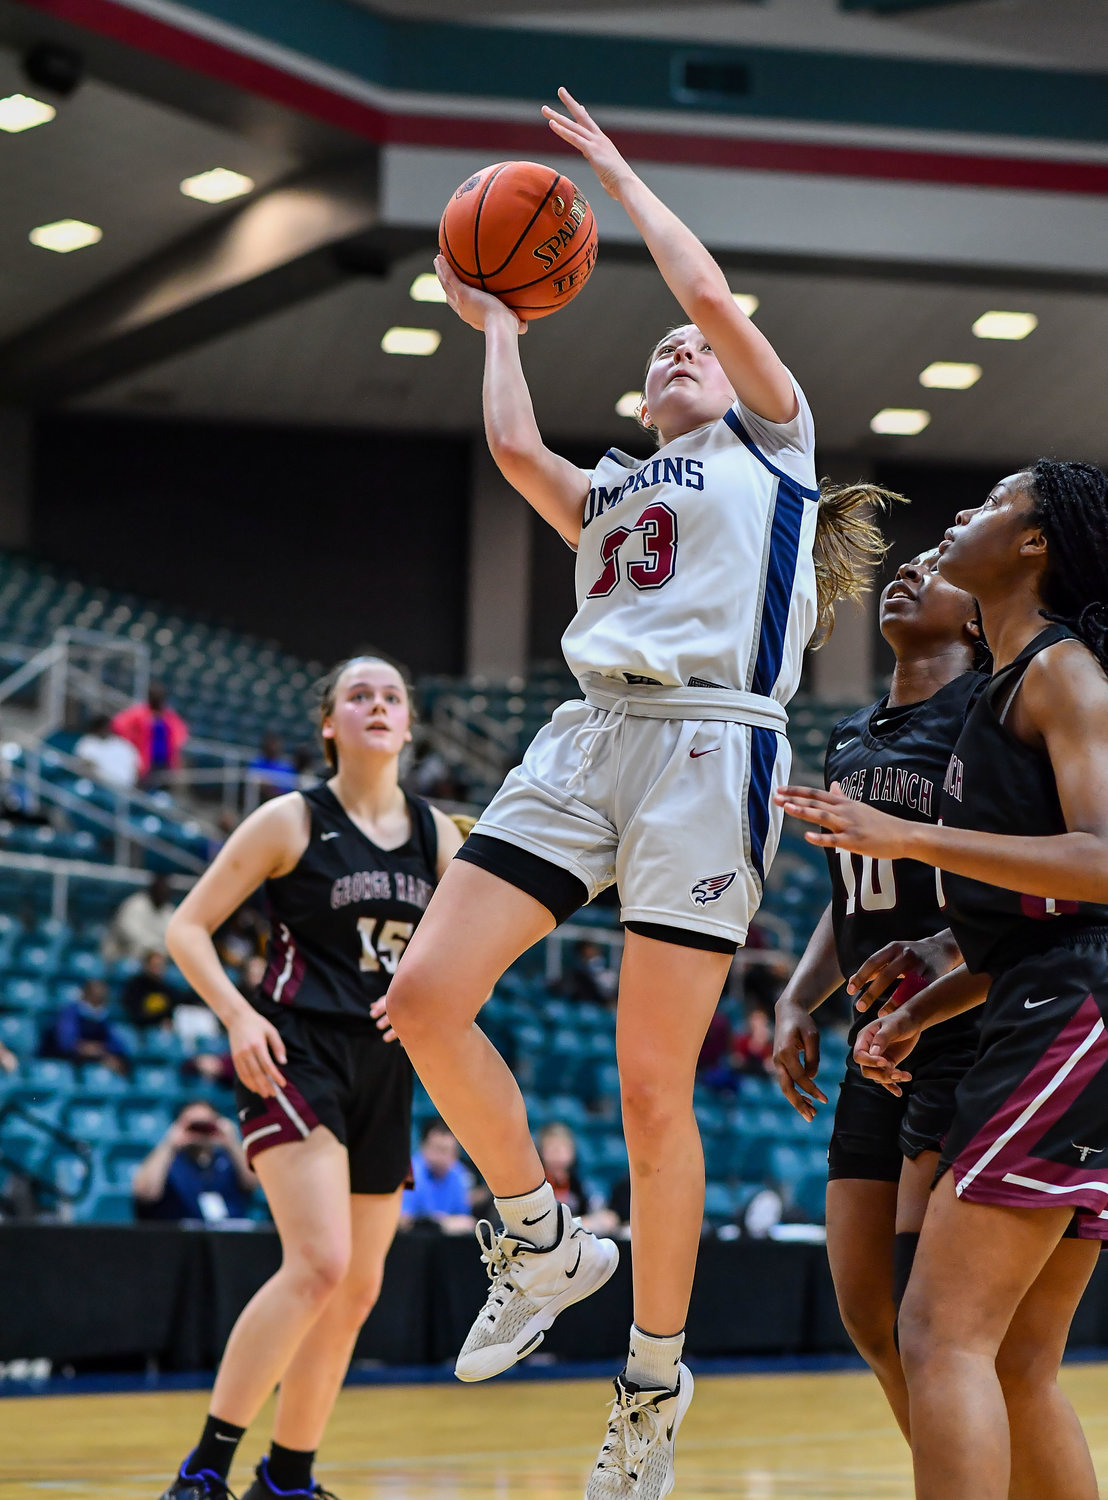 Katy Tx. Feb 15, 2022: Tompkins Macy Spencer #33 drives to the basket during the Bi-District playoff, Tompkins vs George Ranch. (Photo by Mark Goodman / Katy Times)